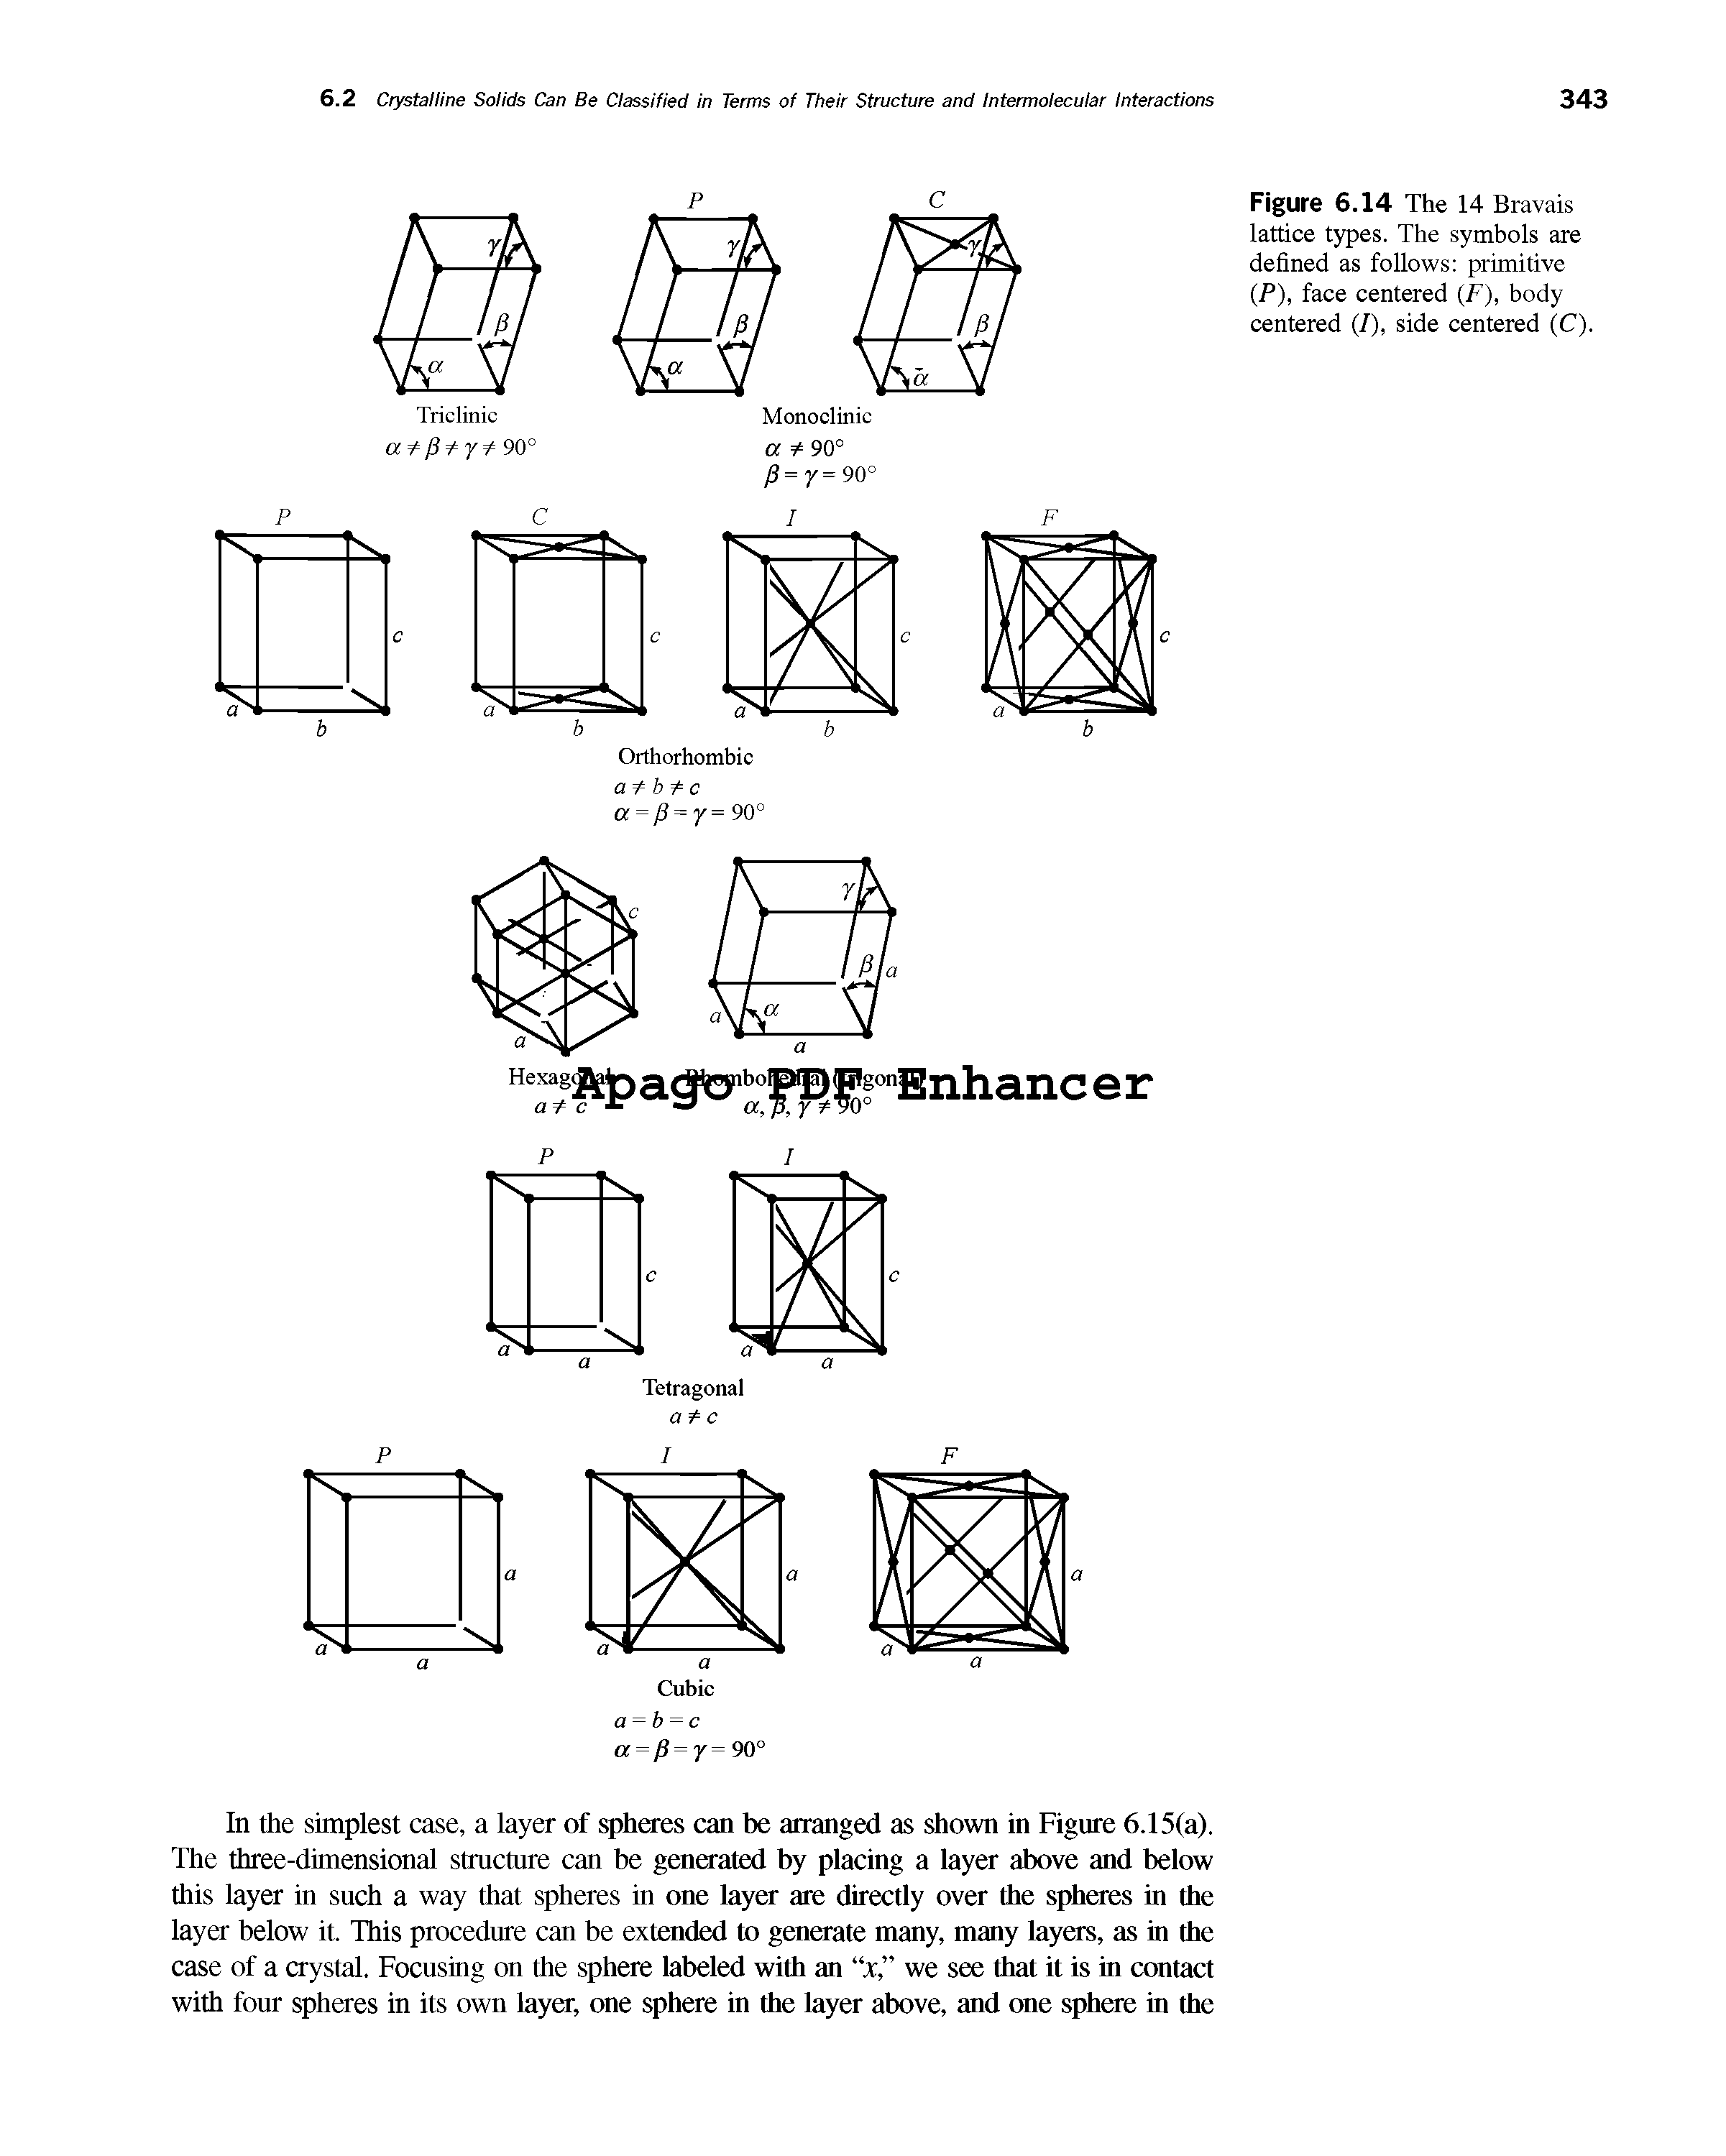 Figure 6.14 The 14 Bravais lattice types. The symbols are defined as follows primitive (P), face centered (F), body centered (I), side centered (C).